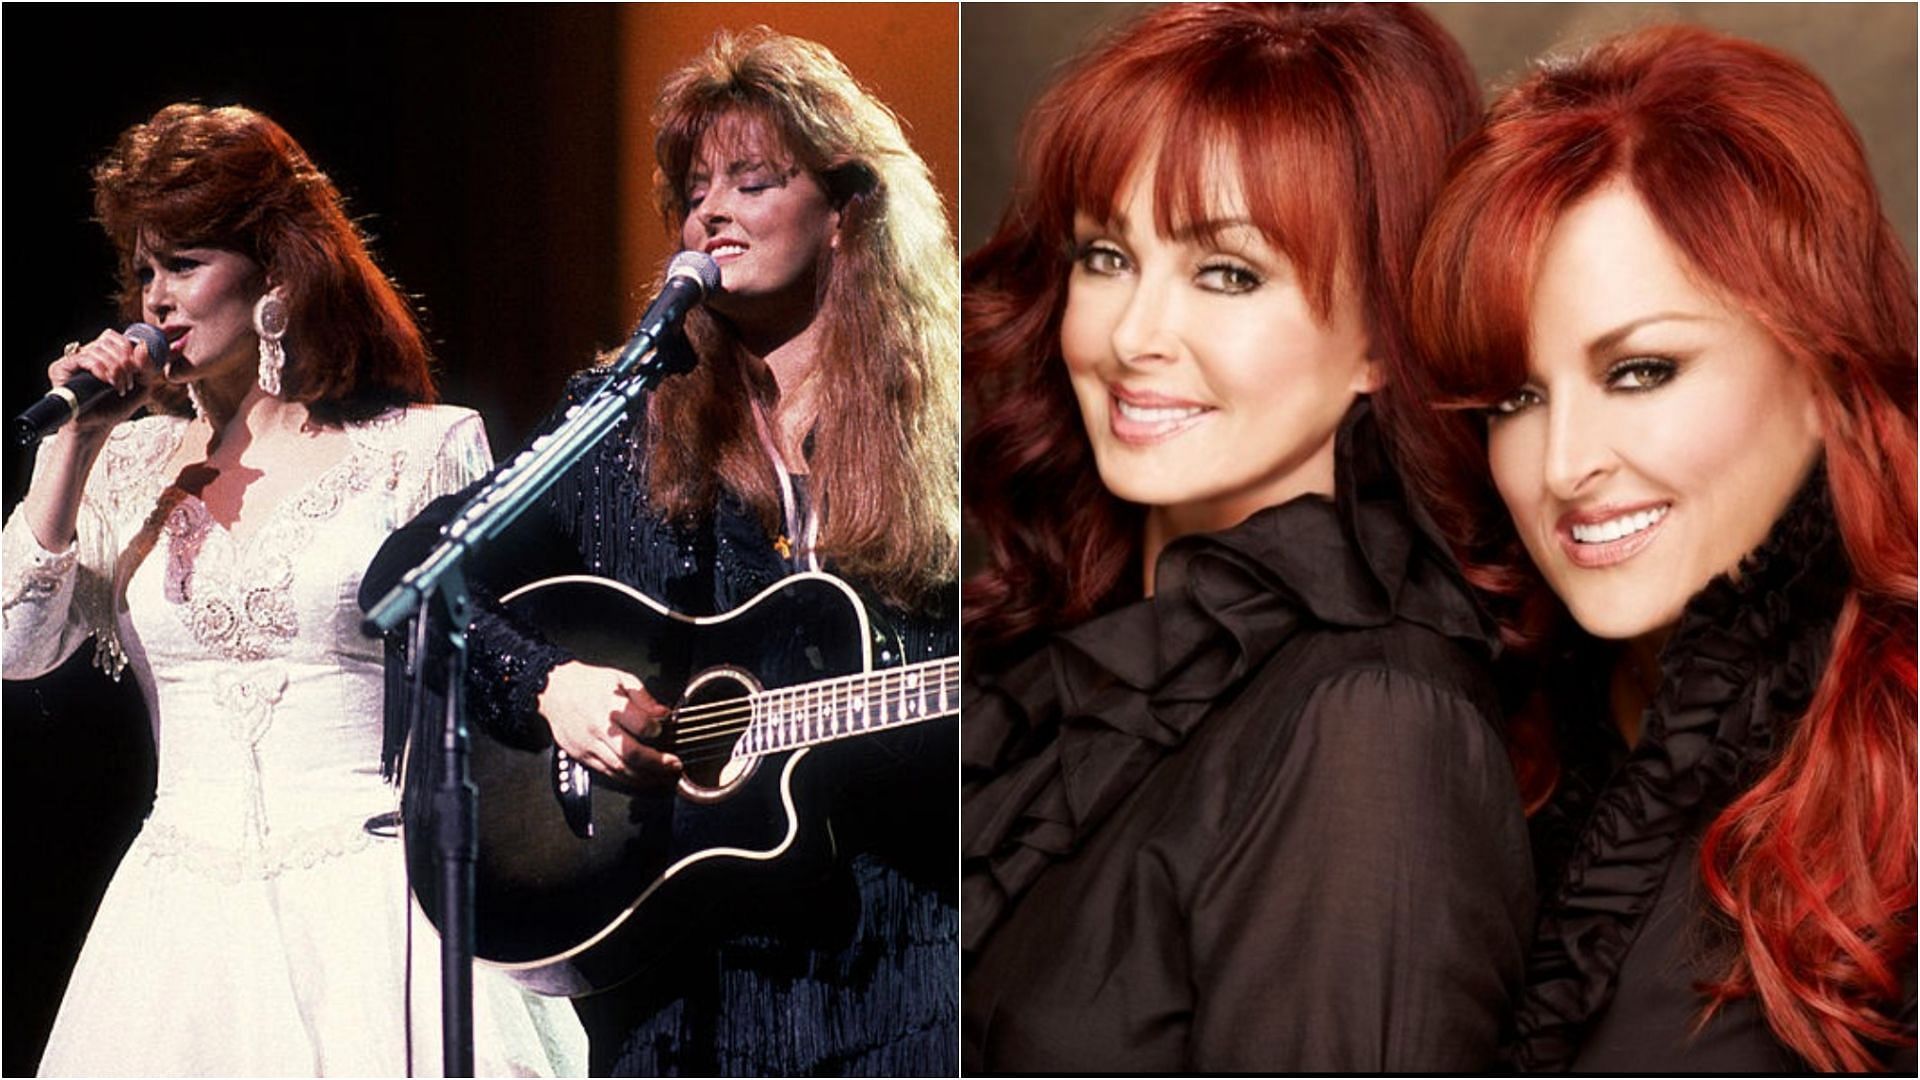 The Judds have announced their first tour in over a decade, slated for September (Image via Paul Natkin /Getty and Facebook/The Judds)